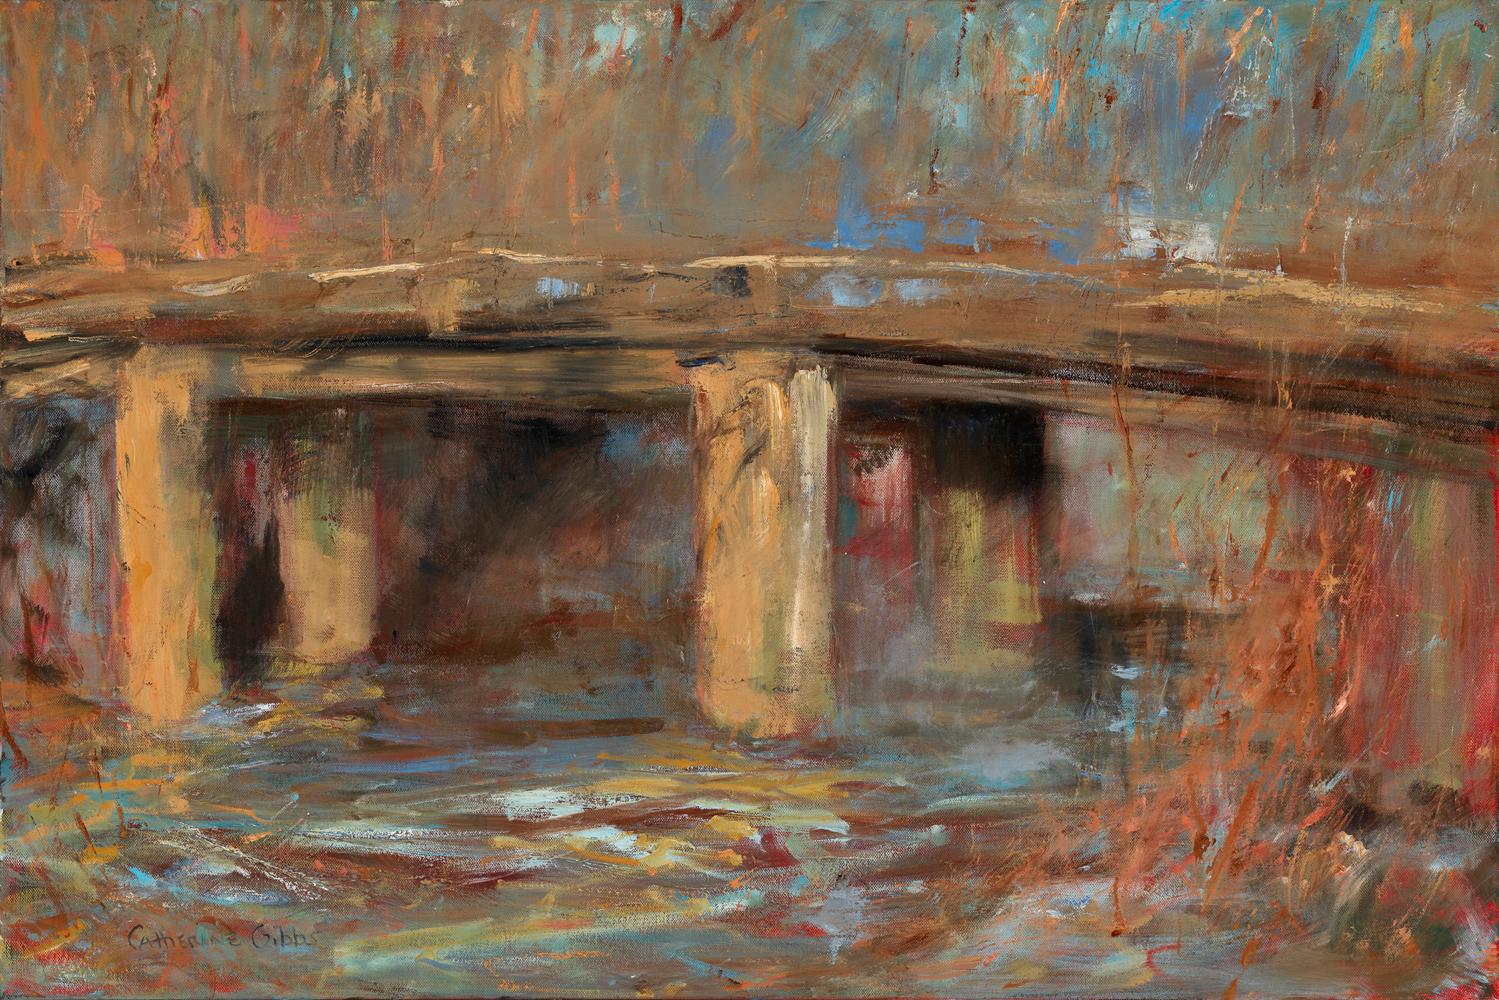 "Cement Bridge", oil painting, landscape, contemporary, yellow, brown, orange - Painting by Catherine Picard-Gibbs